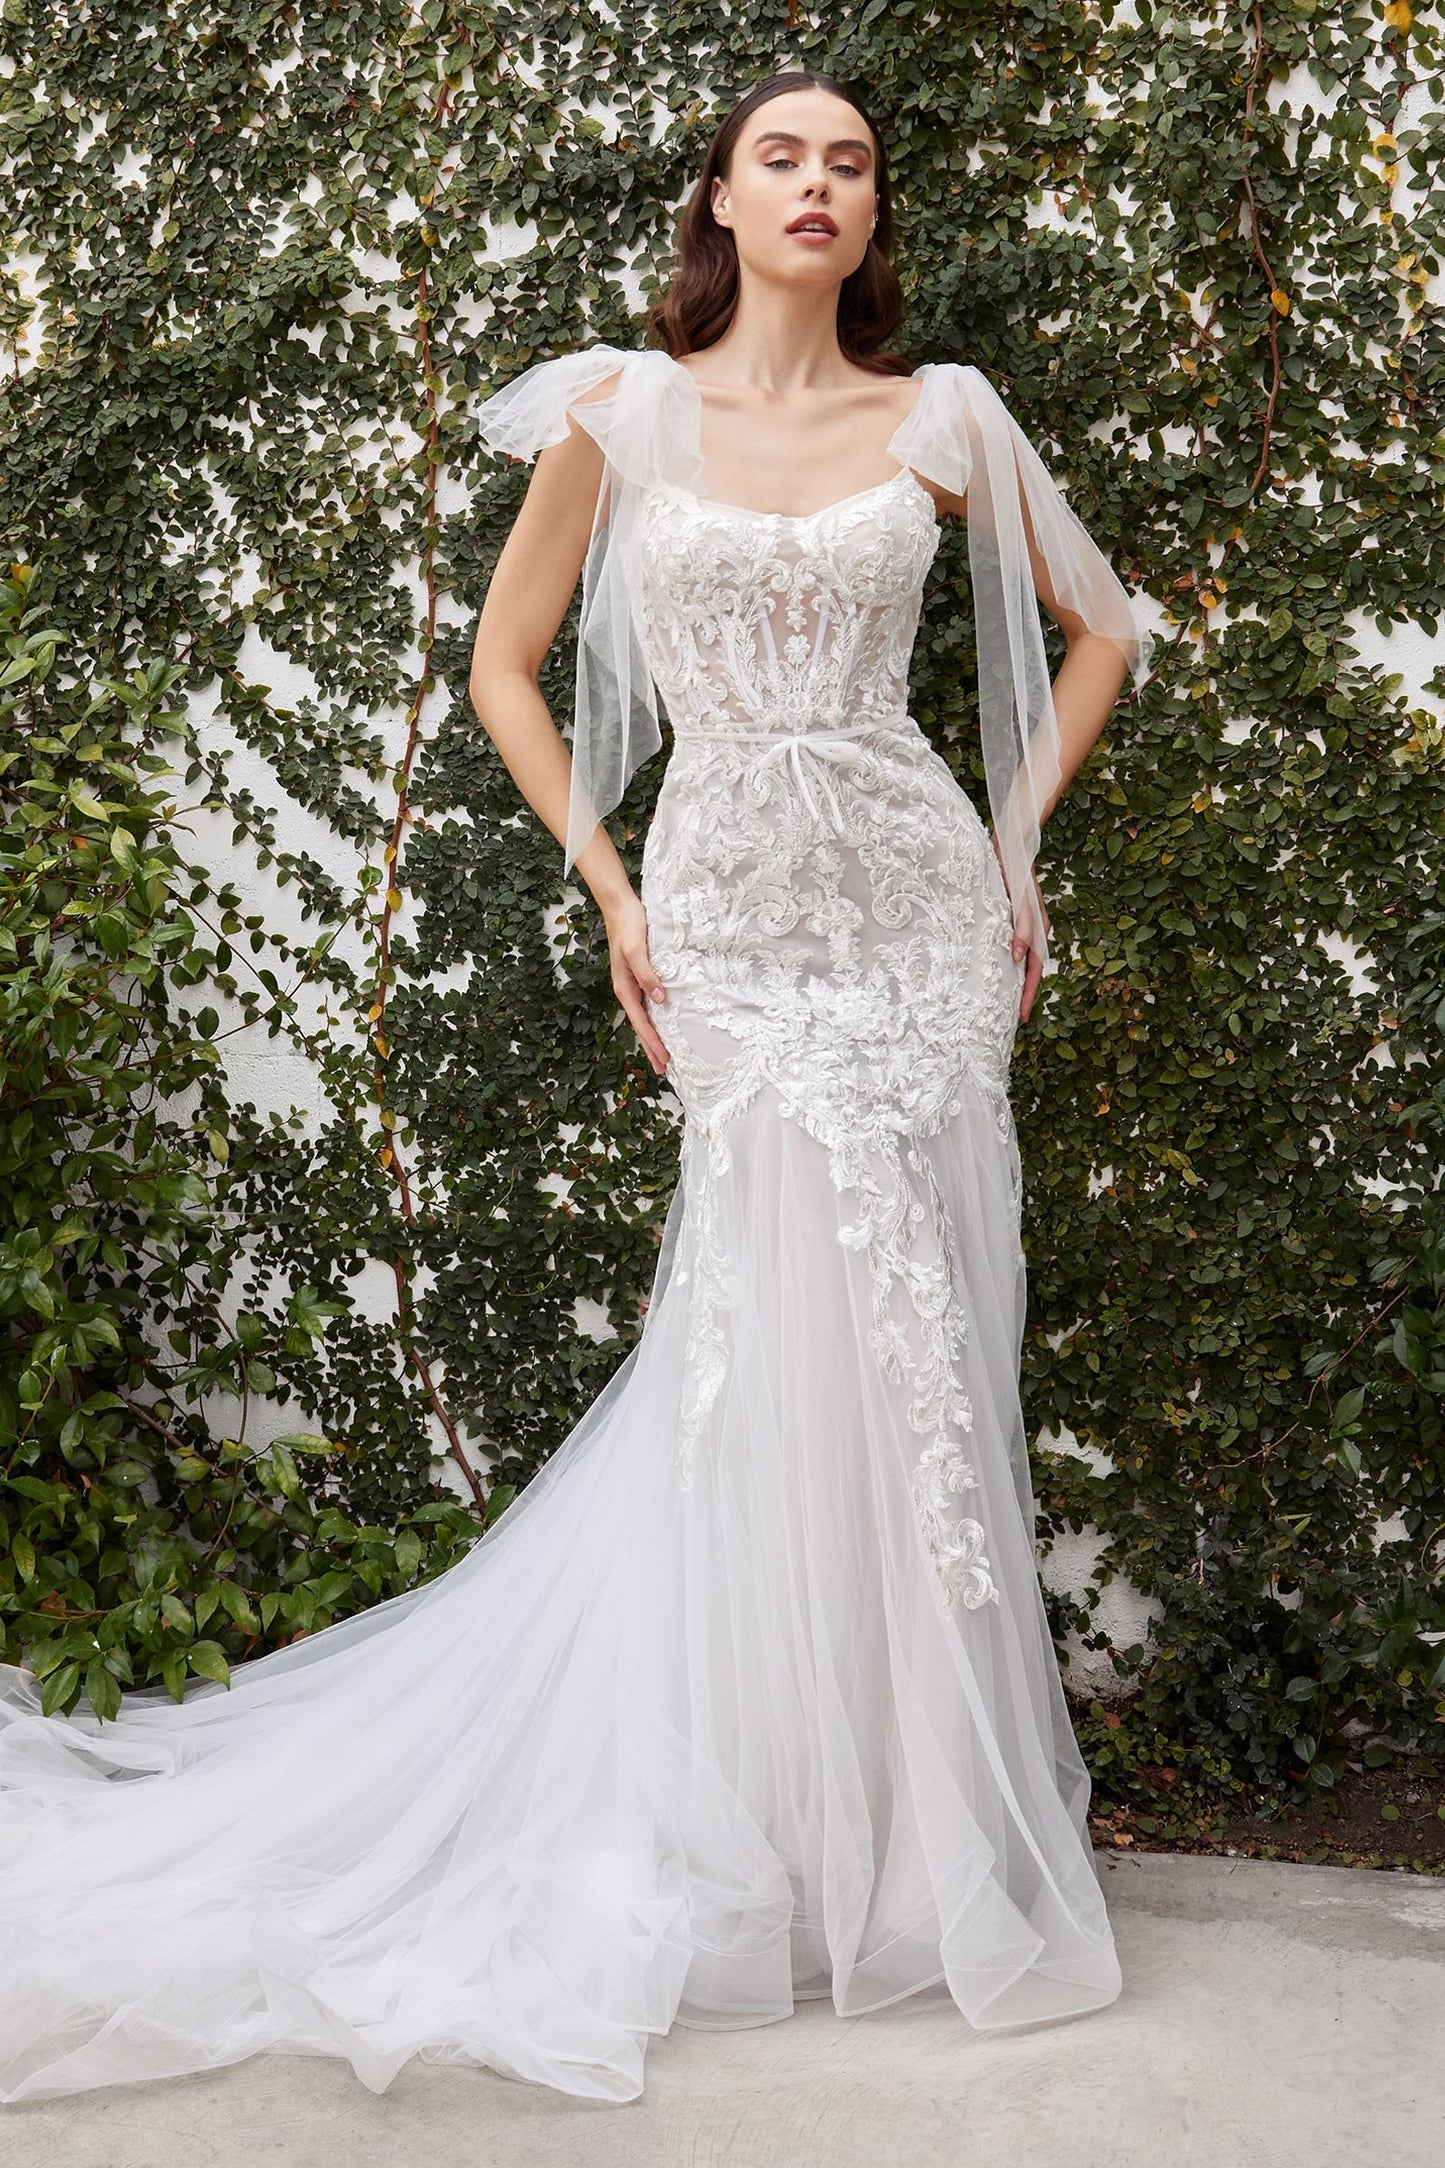 Playful lace gown with detachable tulle ribbons that can be tied delicately around the straps